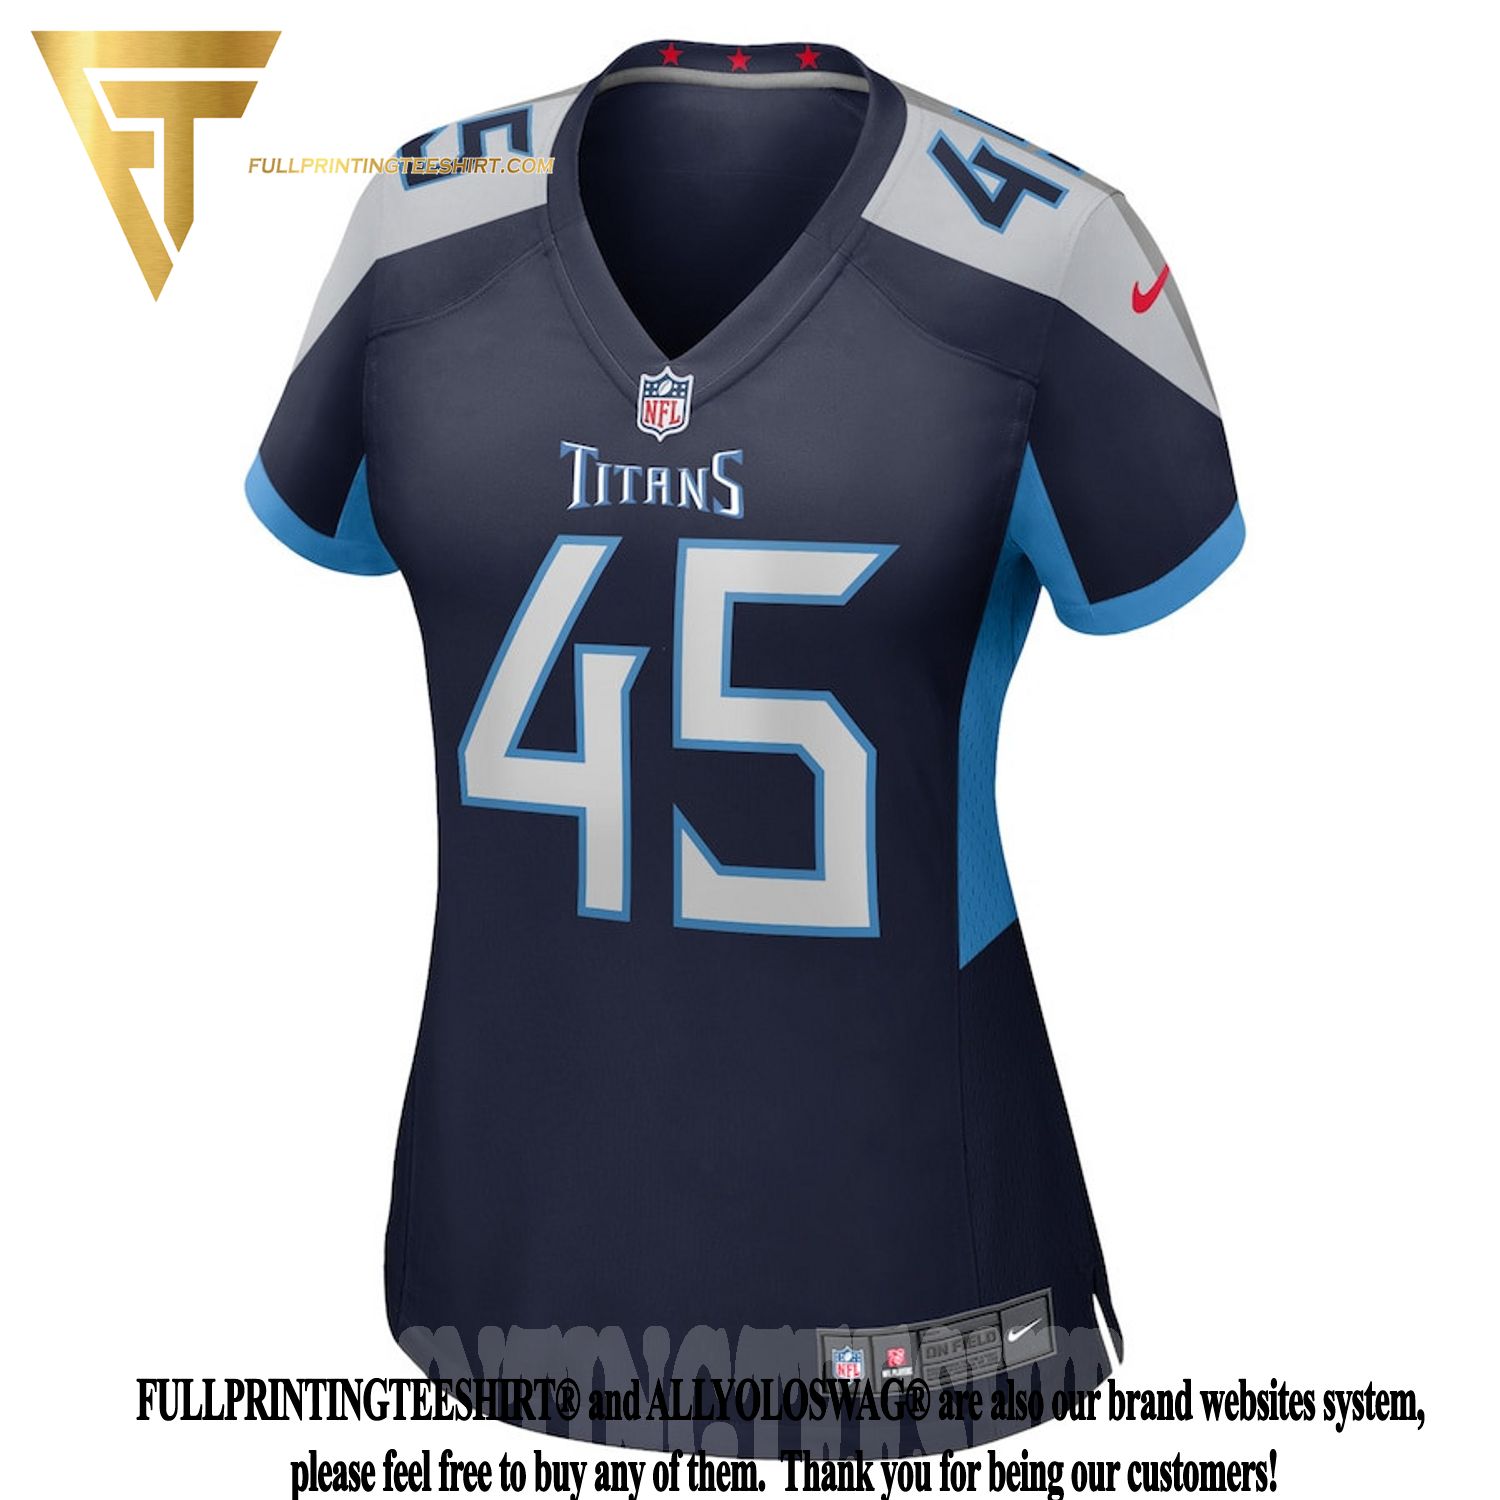 Top-selling Item] Chance Campbell Tennessee Titans Player Game 3D Unisex  Jersey - Navy